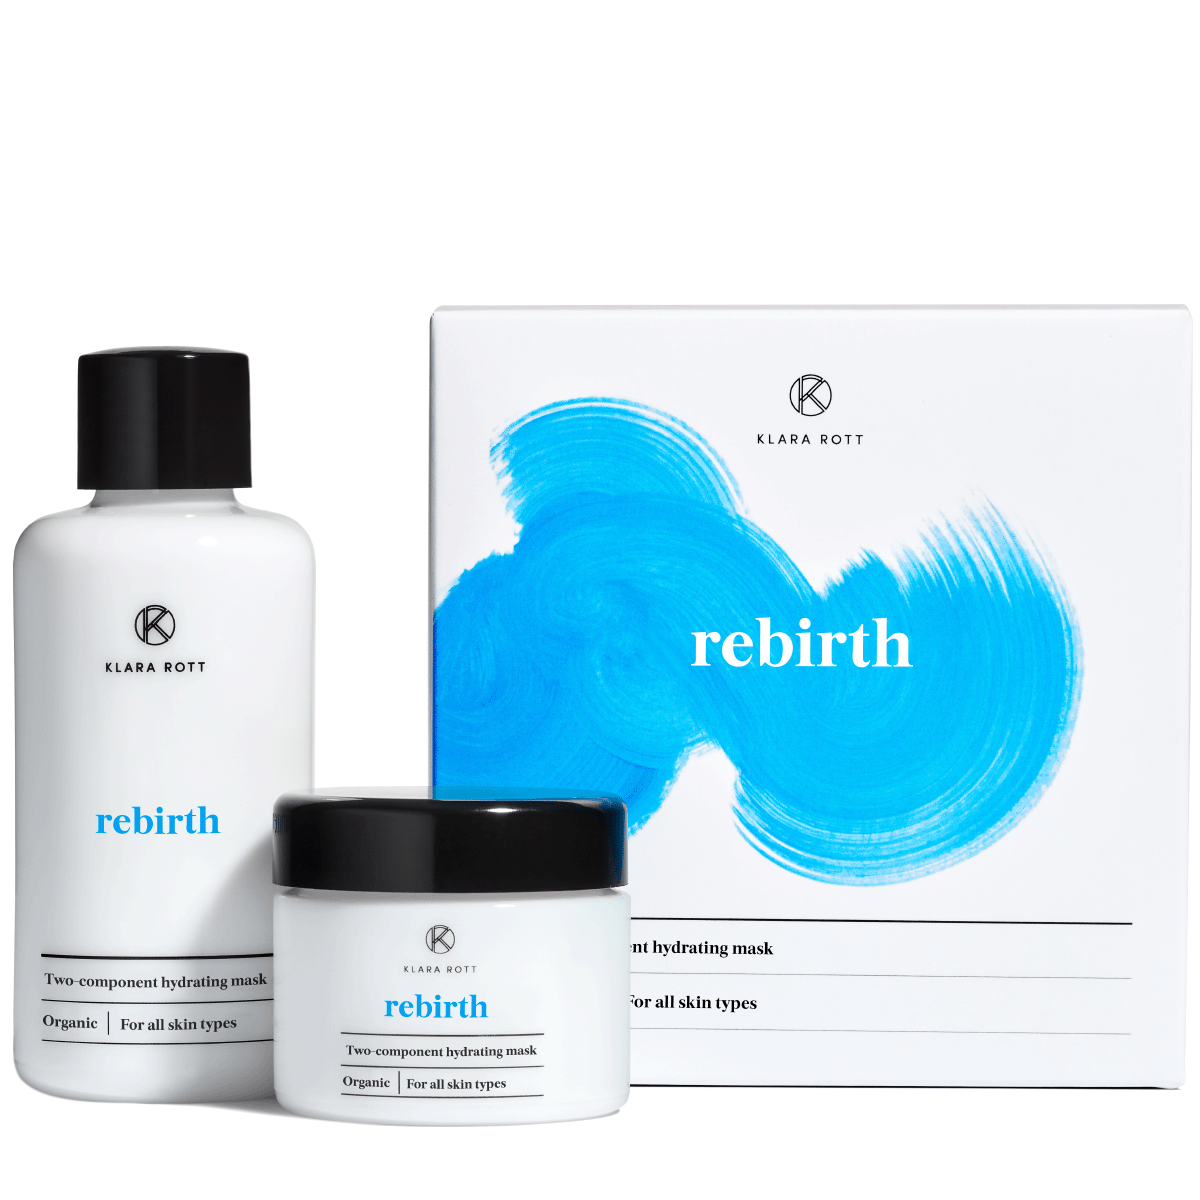 Rebirth - Two-component hydrating mask 